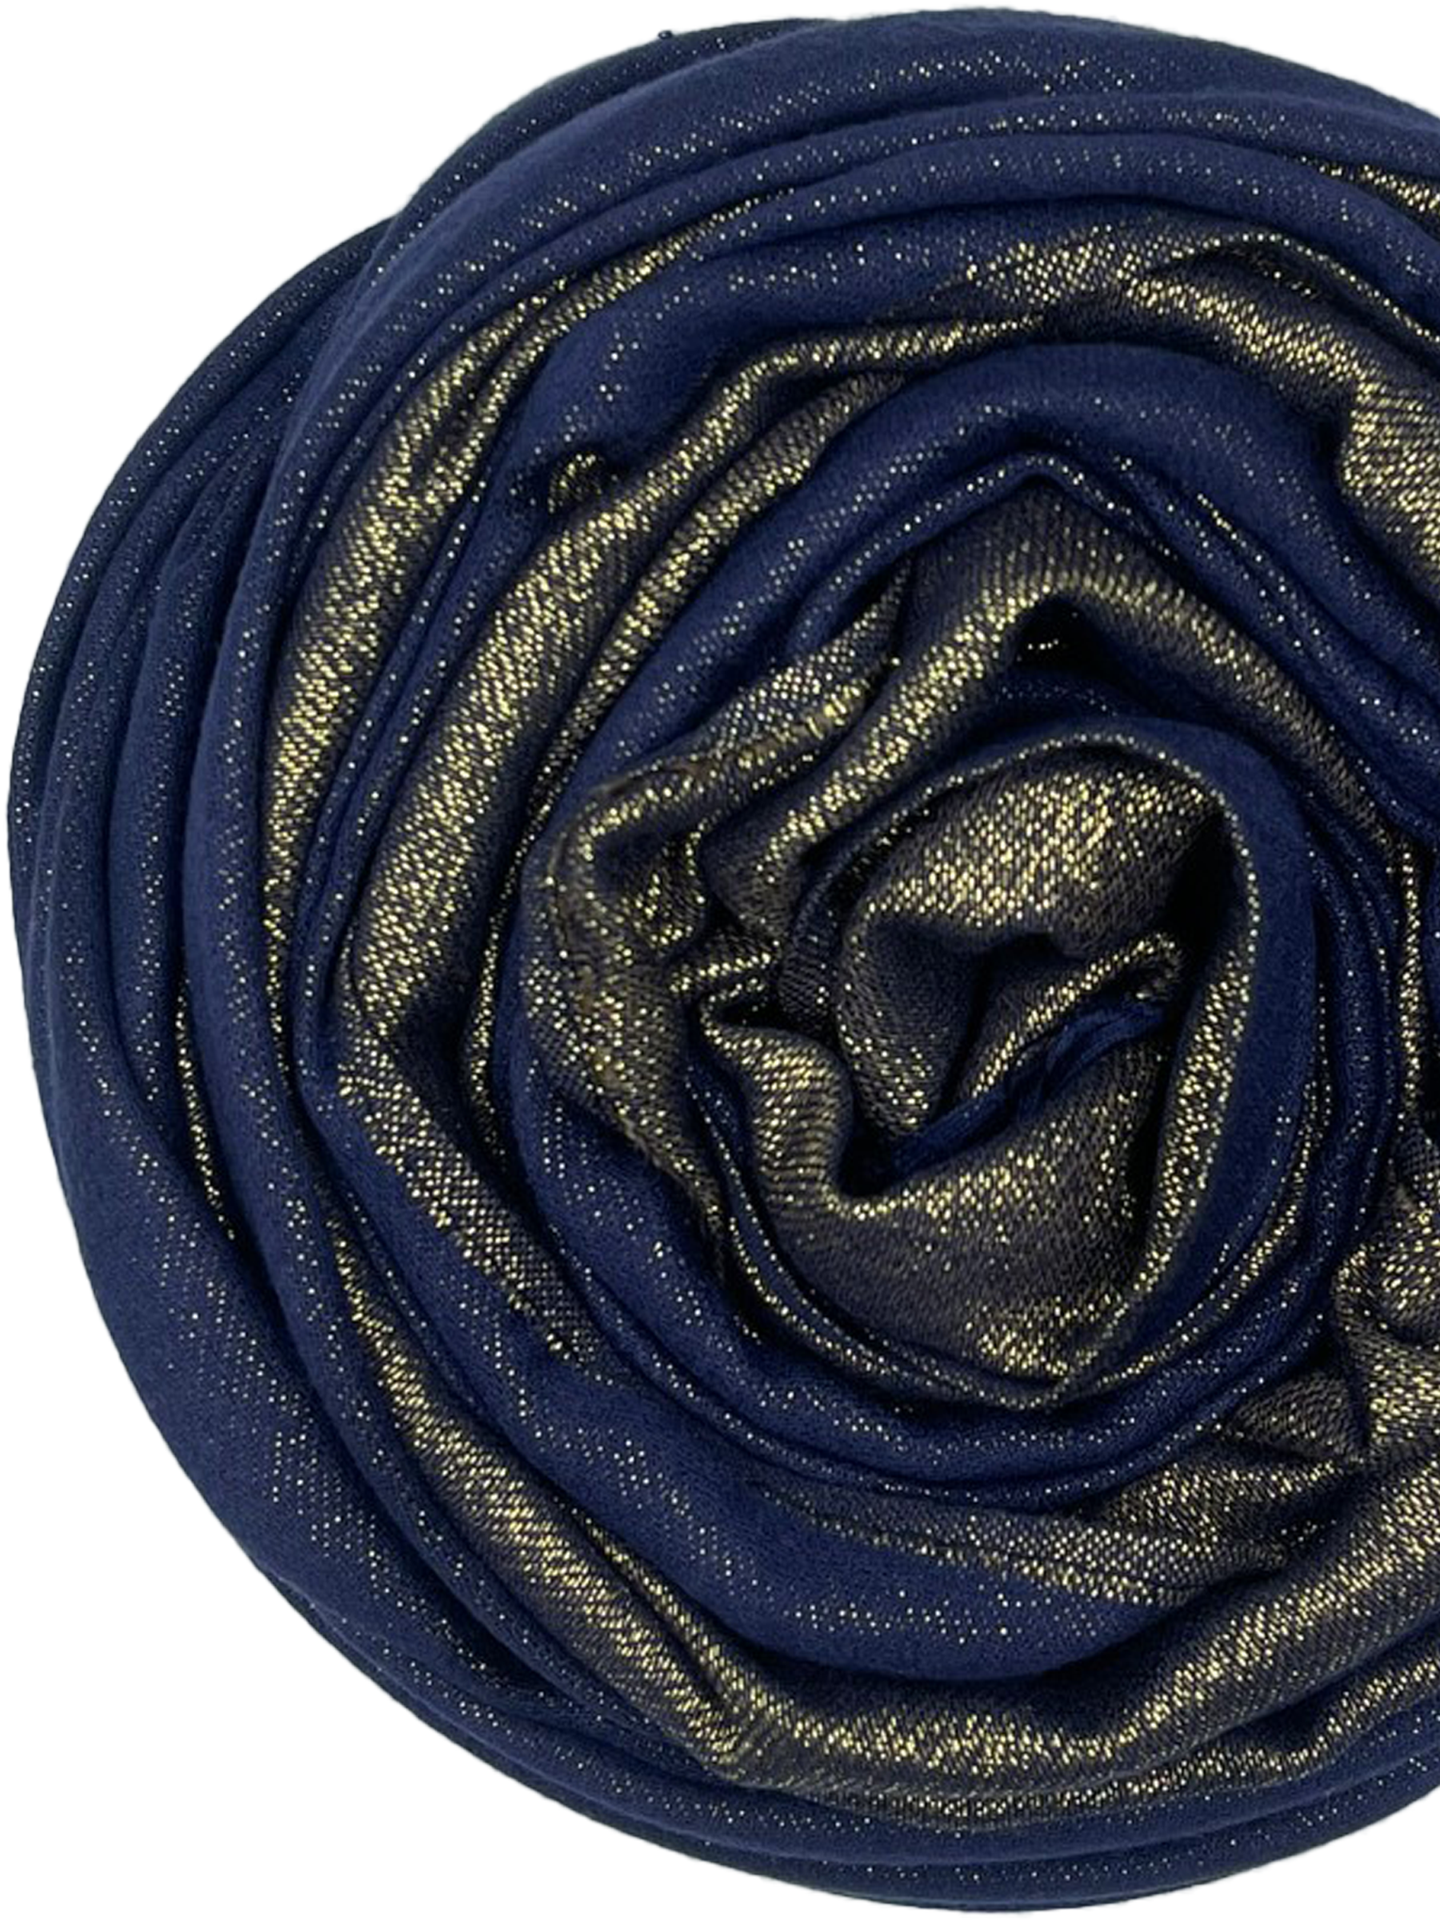 Glamour Scarf - Darkblue with gold